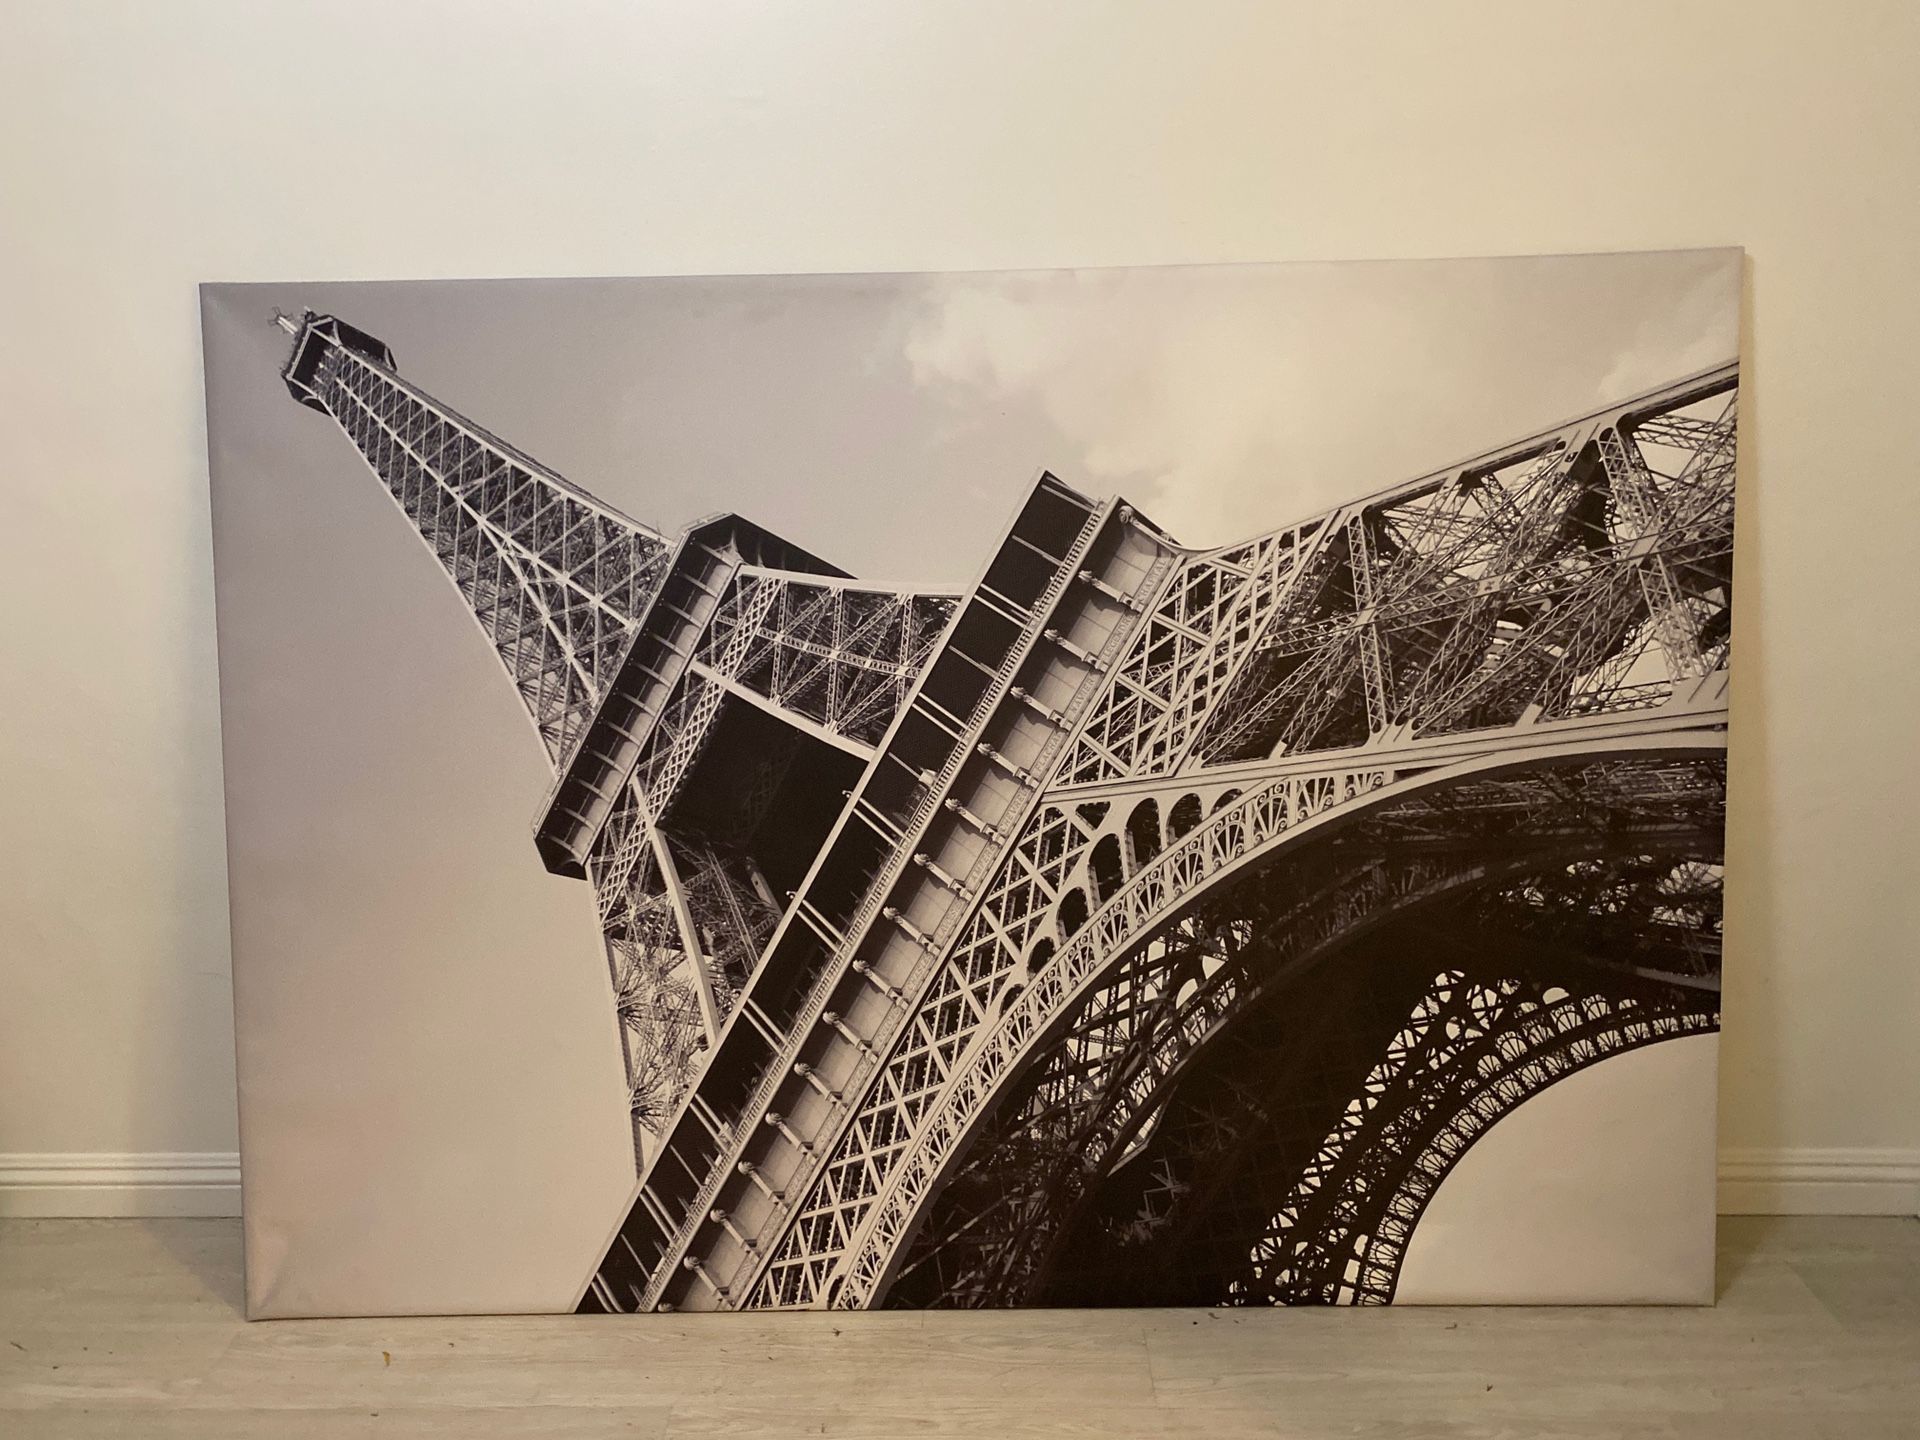 Large Eiffel Tower Frame on Canvas from Ikea